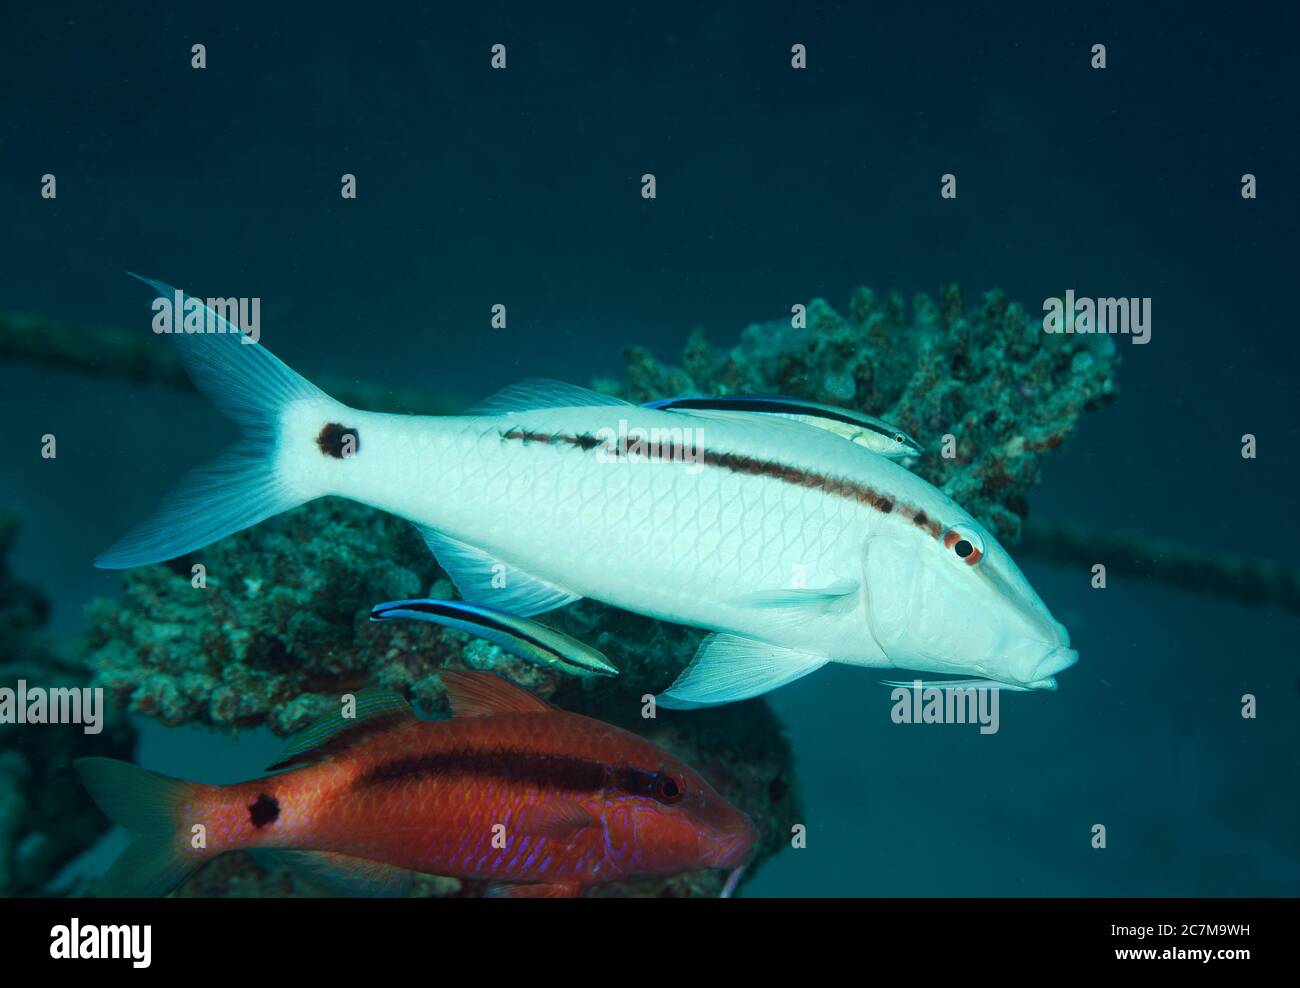 dash-and-dot goatfish, Parupeneus barberinus, with a cleaner Wrasse, Labraoides dimidiatus, in Maldives Stock Photo